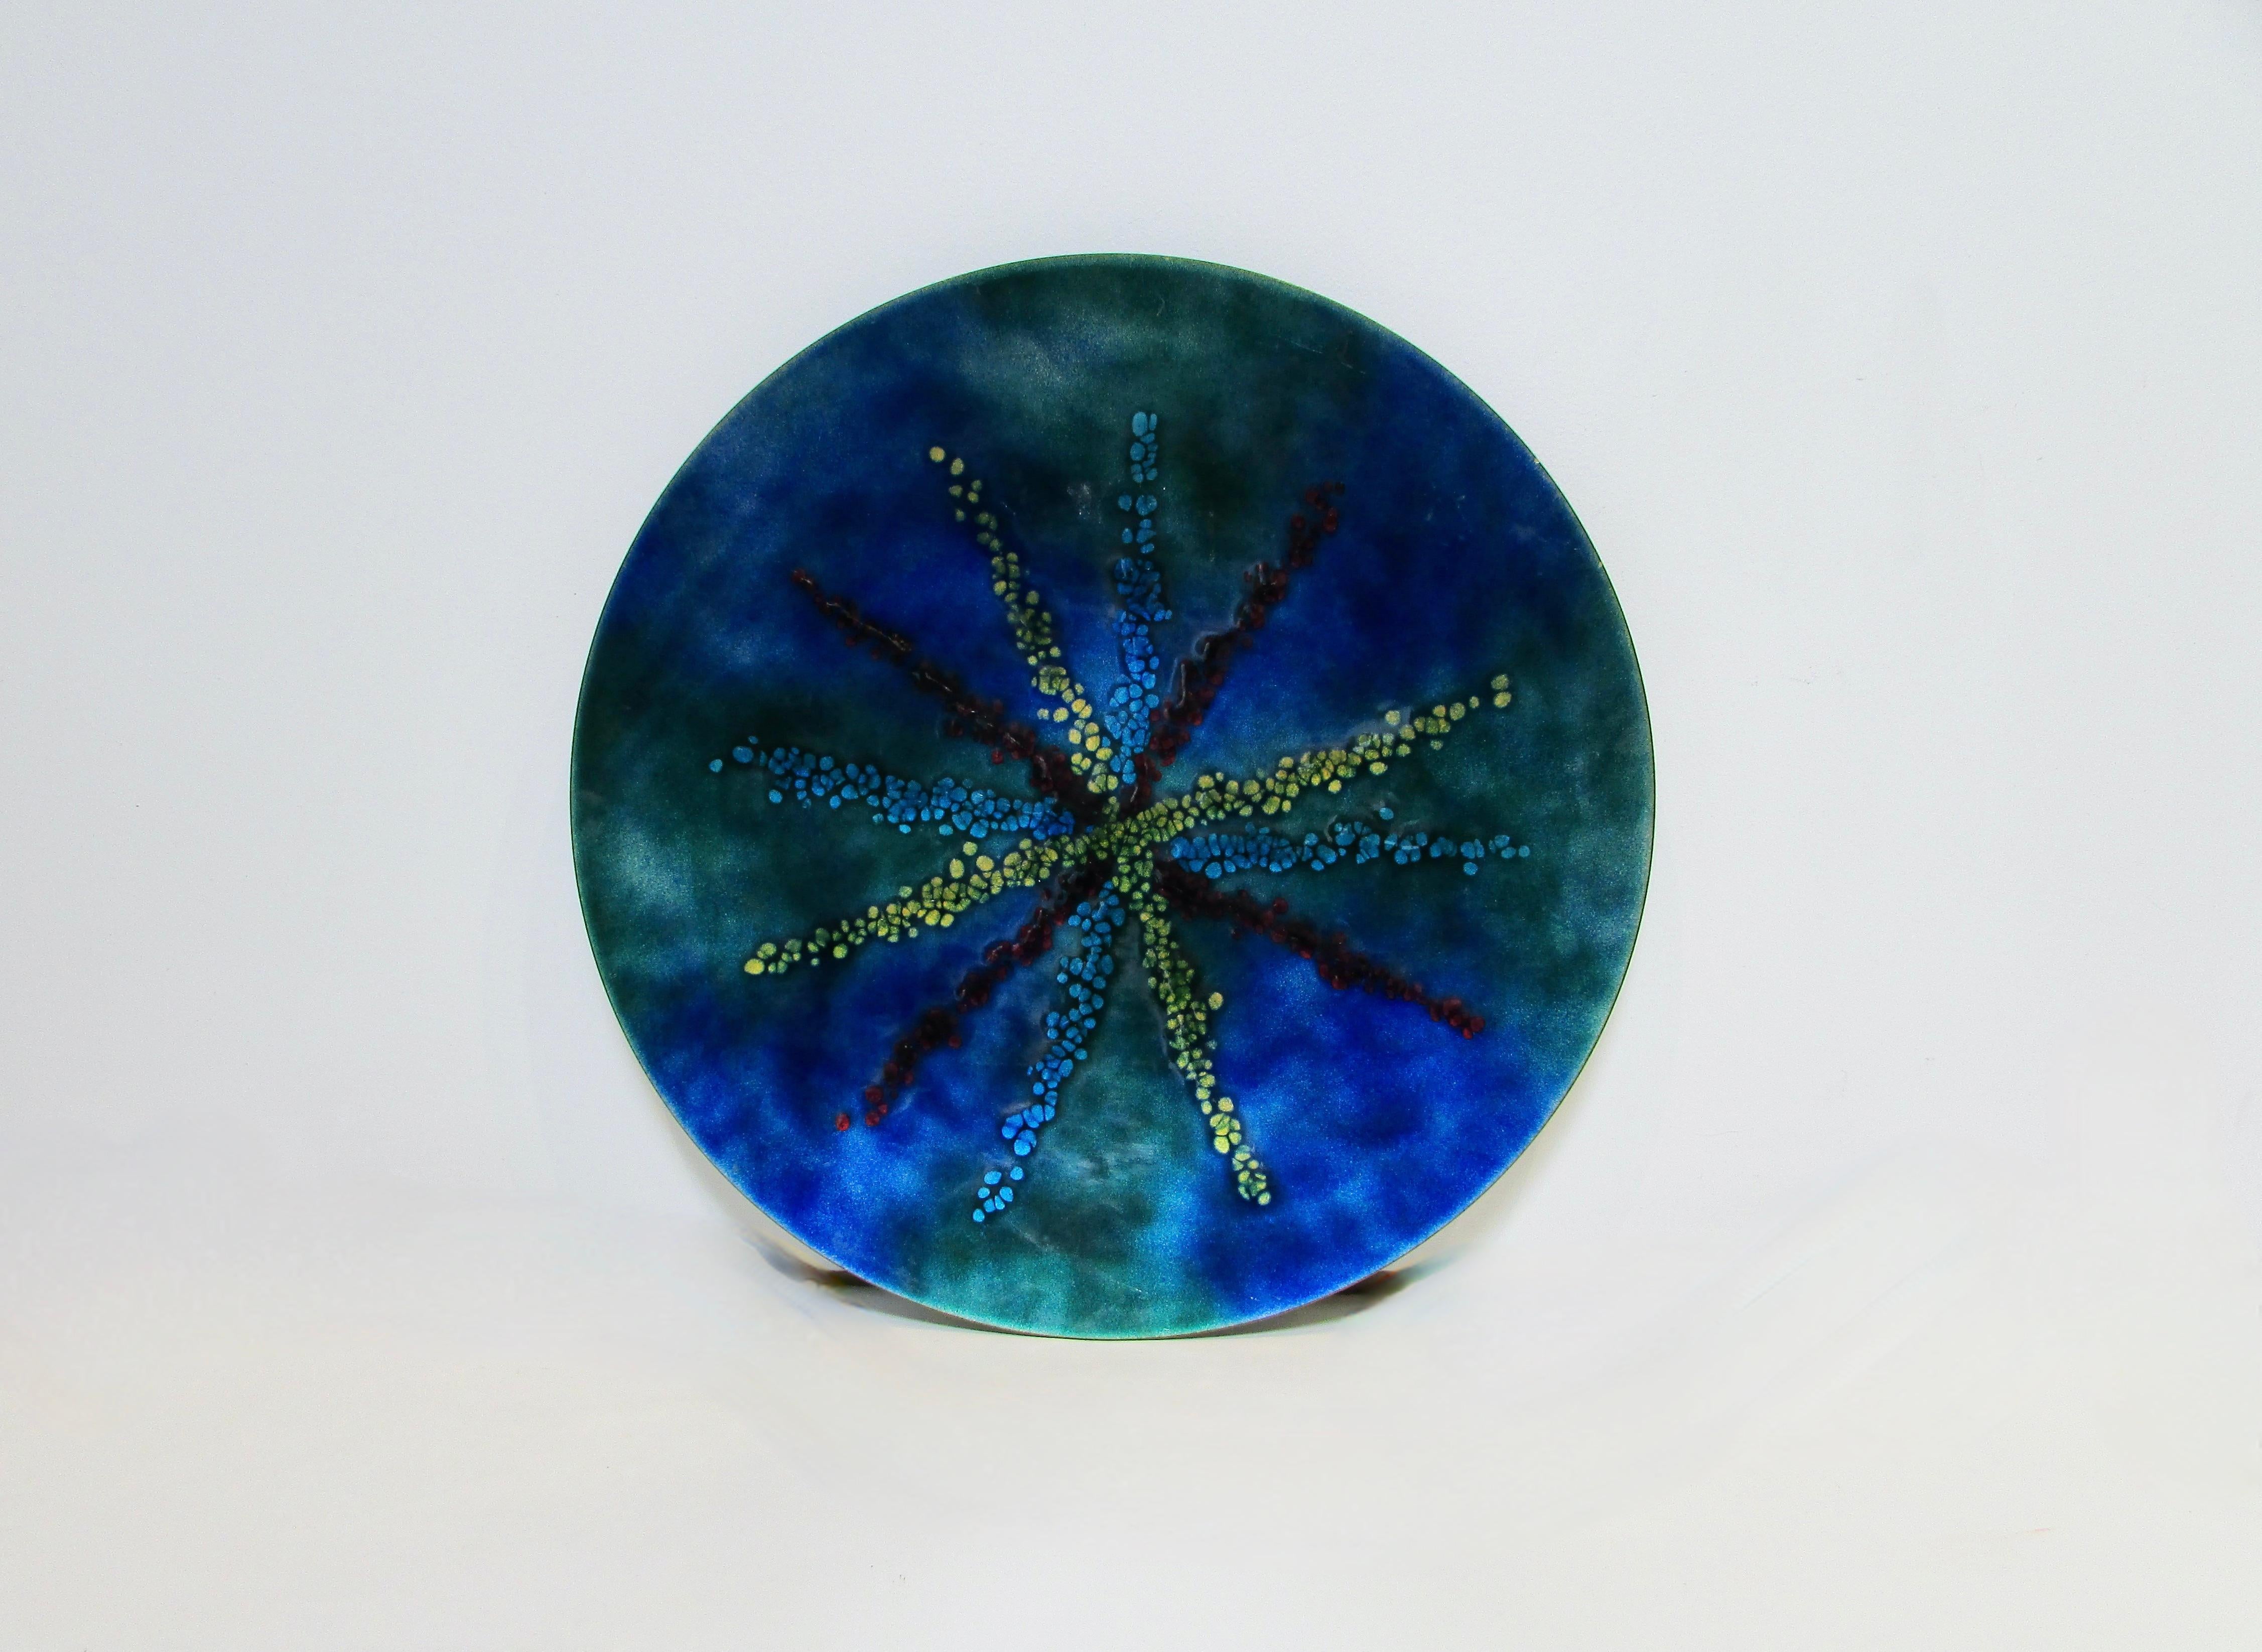 Large size Bovine serving tray or charger . Fused glass on copper . 
The history of Bovano of Cheshire began in 1952, when artist Jim Bower began experimenting with powdered glass fused to small copper plates in the basement of his home in Cheshire,